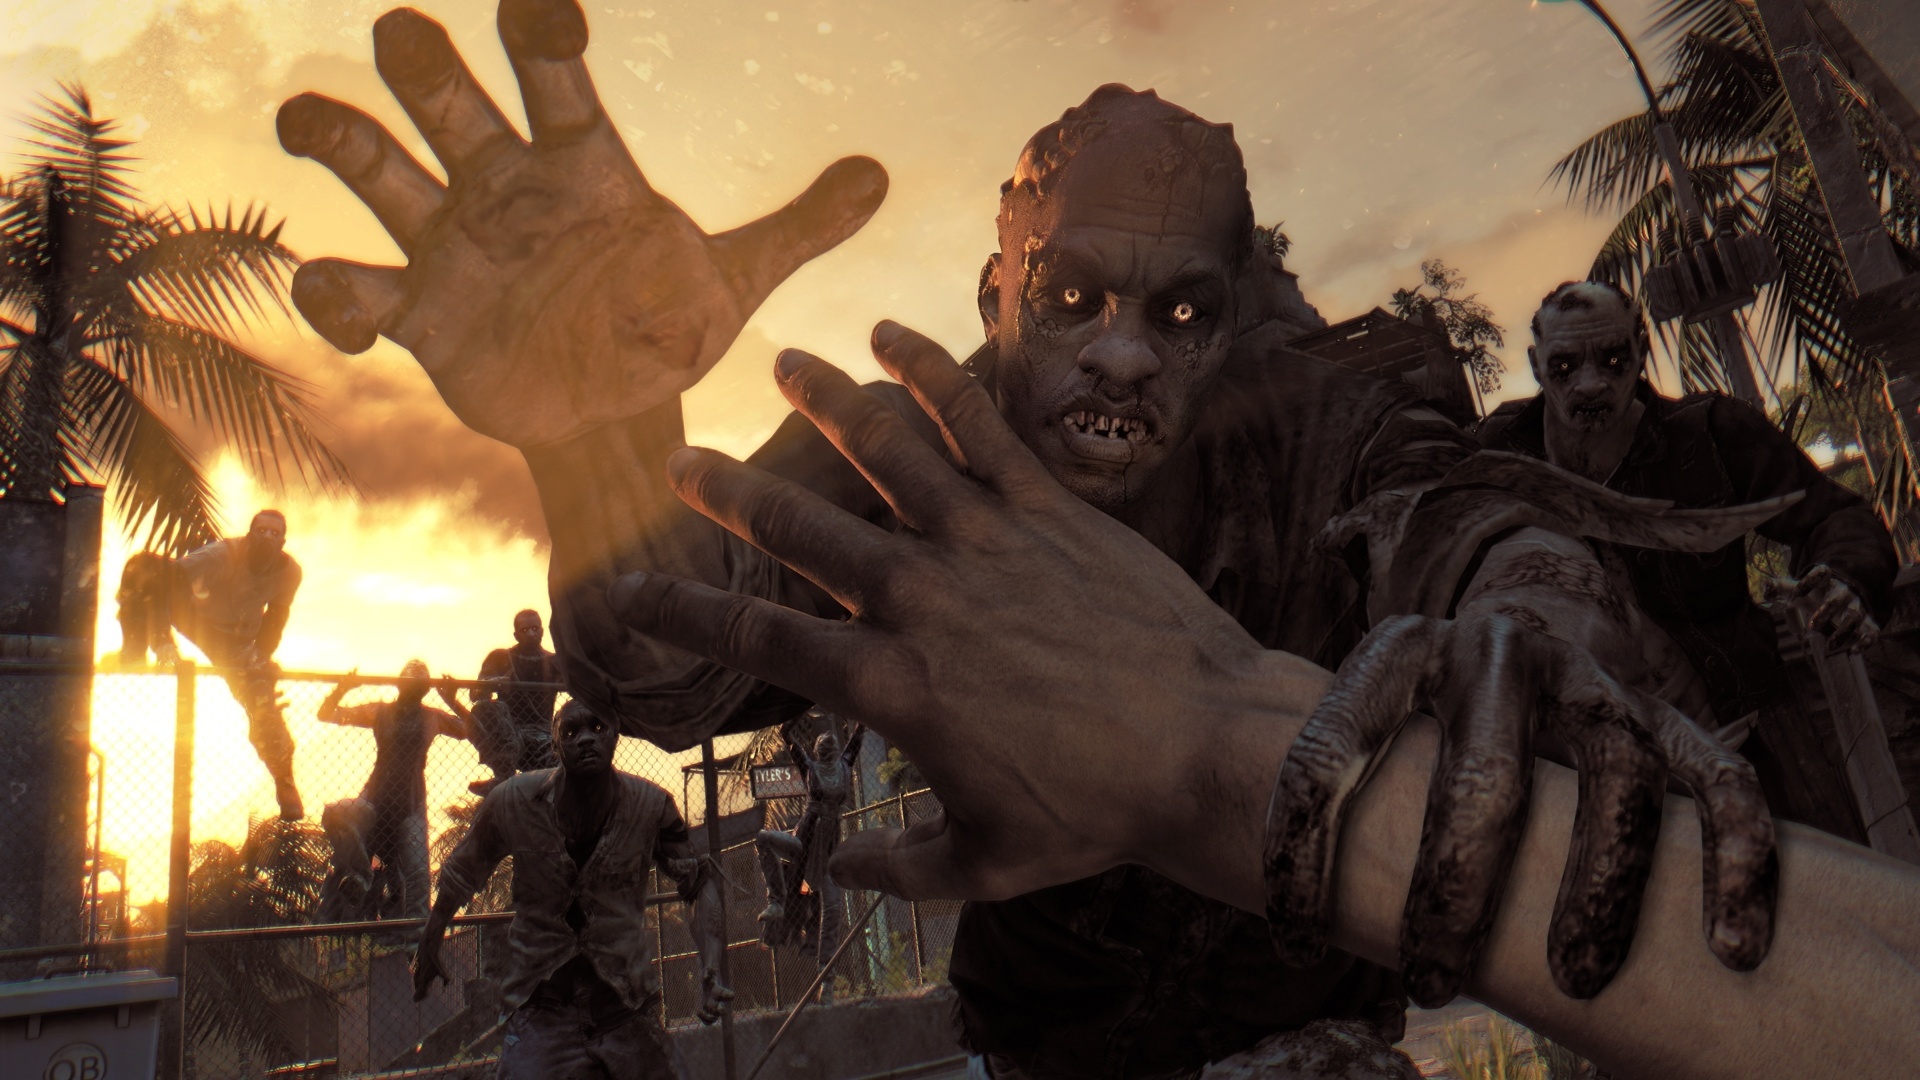 Dying Light is now Available on Xbox One, PS4, and PC.